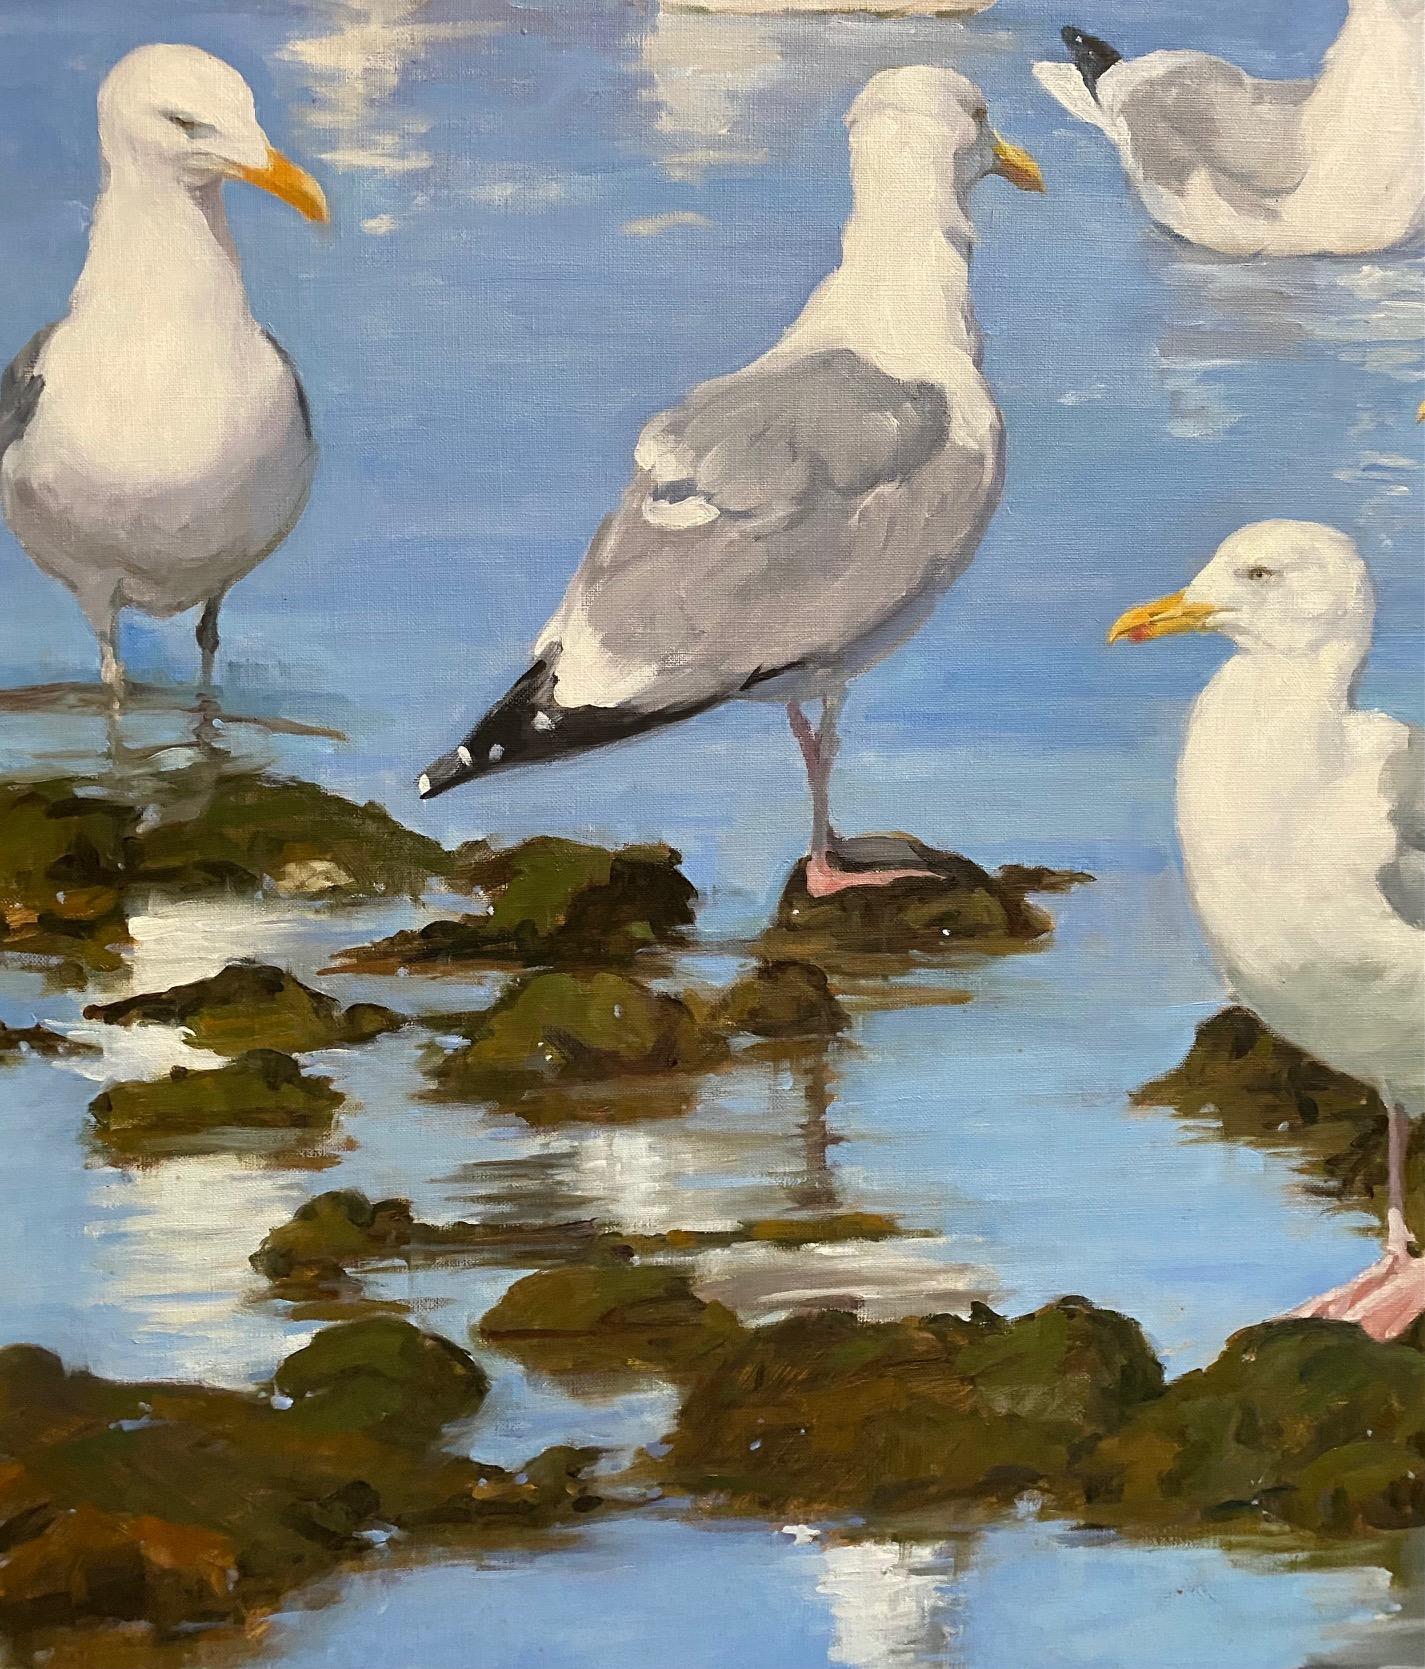 The summer may be winding down but your love of the sea never seems to.  Birds of a feather also extends to those strong willed, hearty beach friends, the seagulls!  They keep us company through thick or thin!  Realist painter Joseph Sundwall has